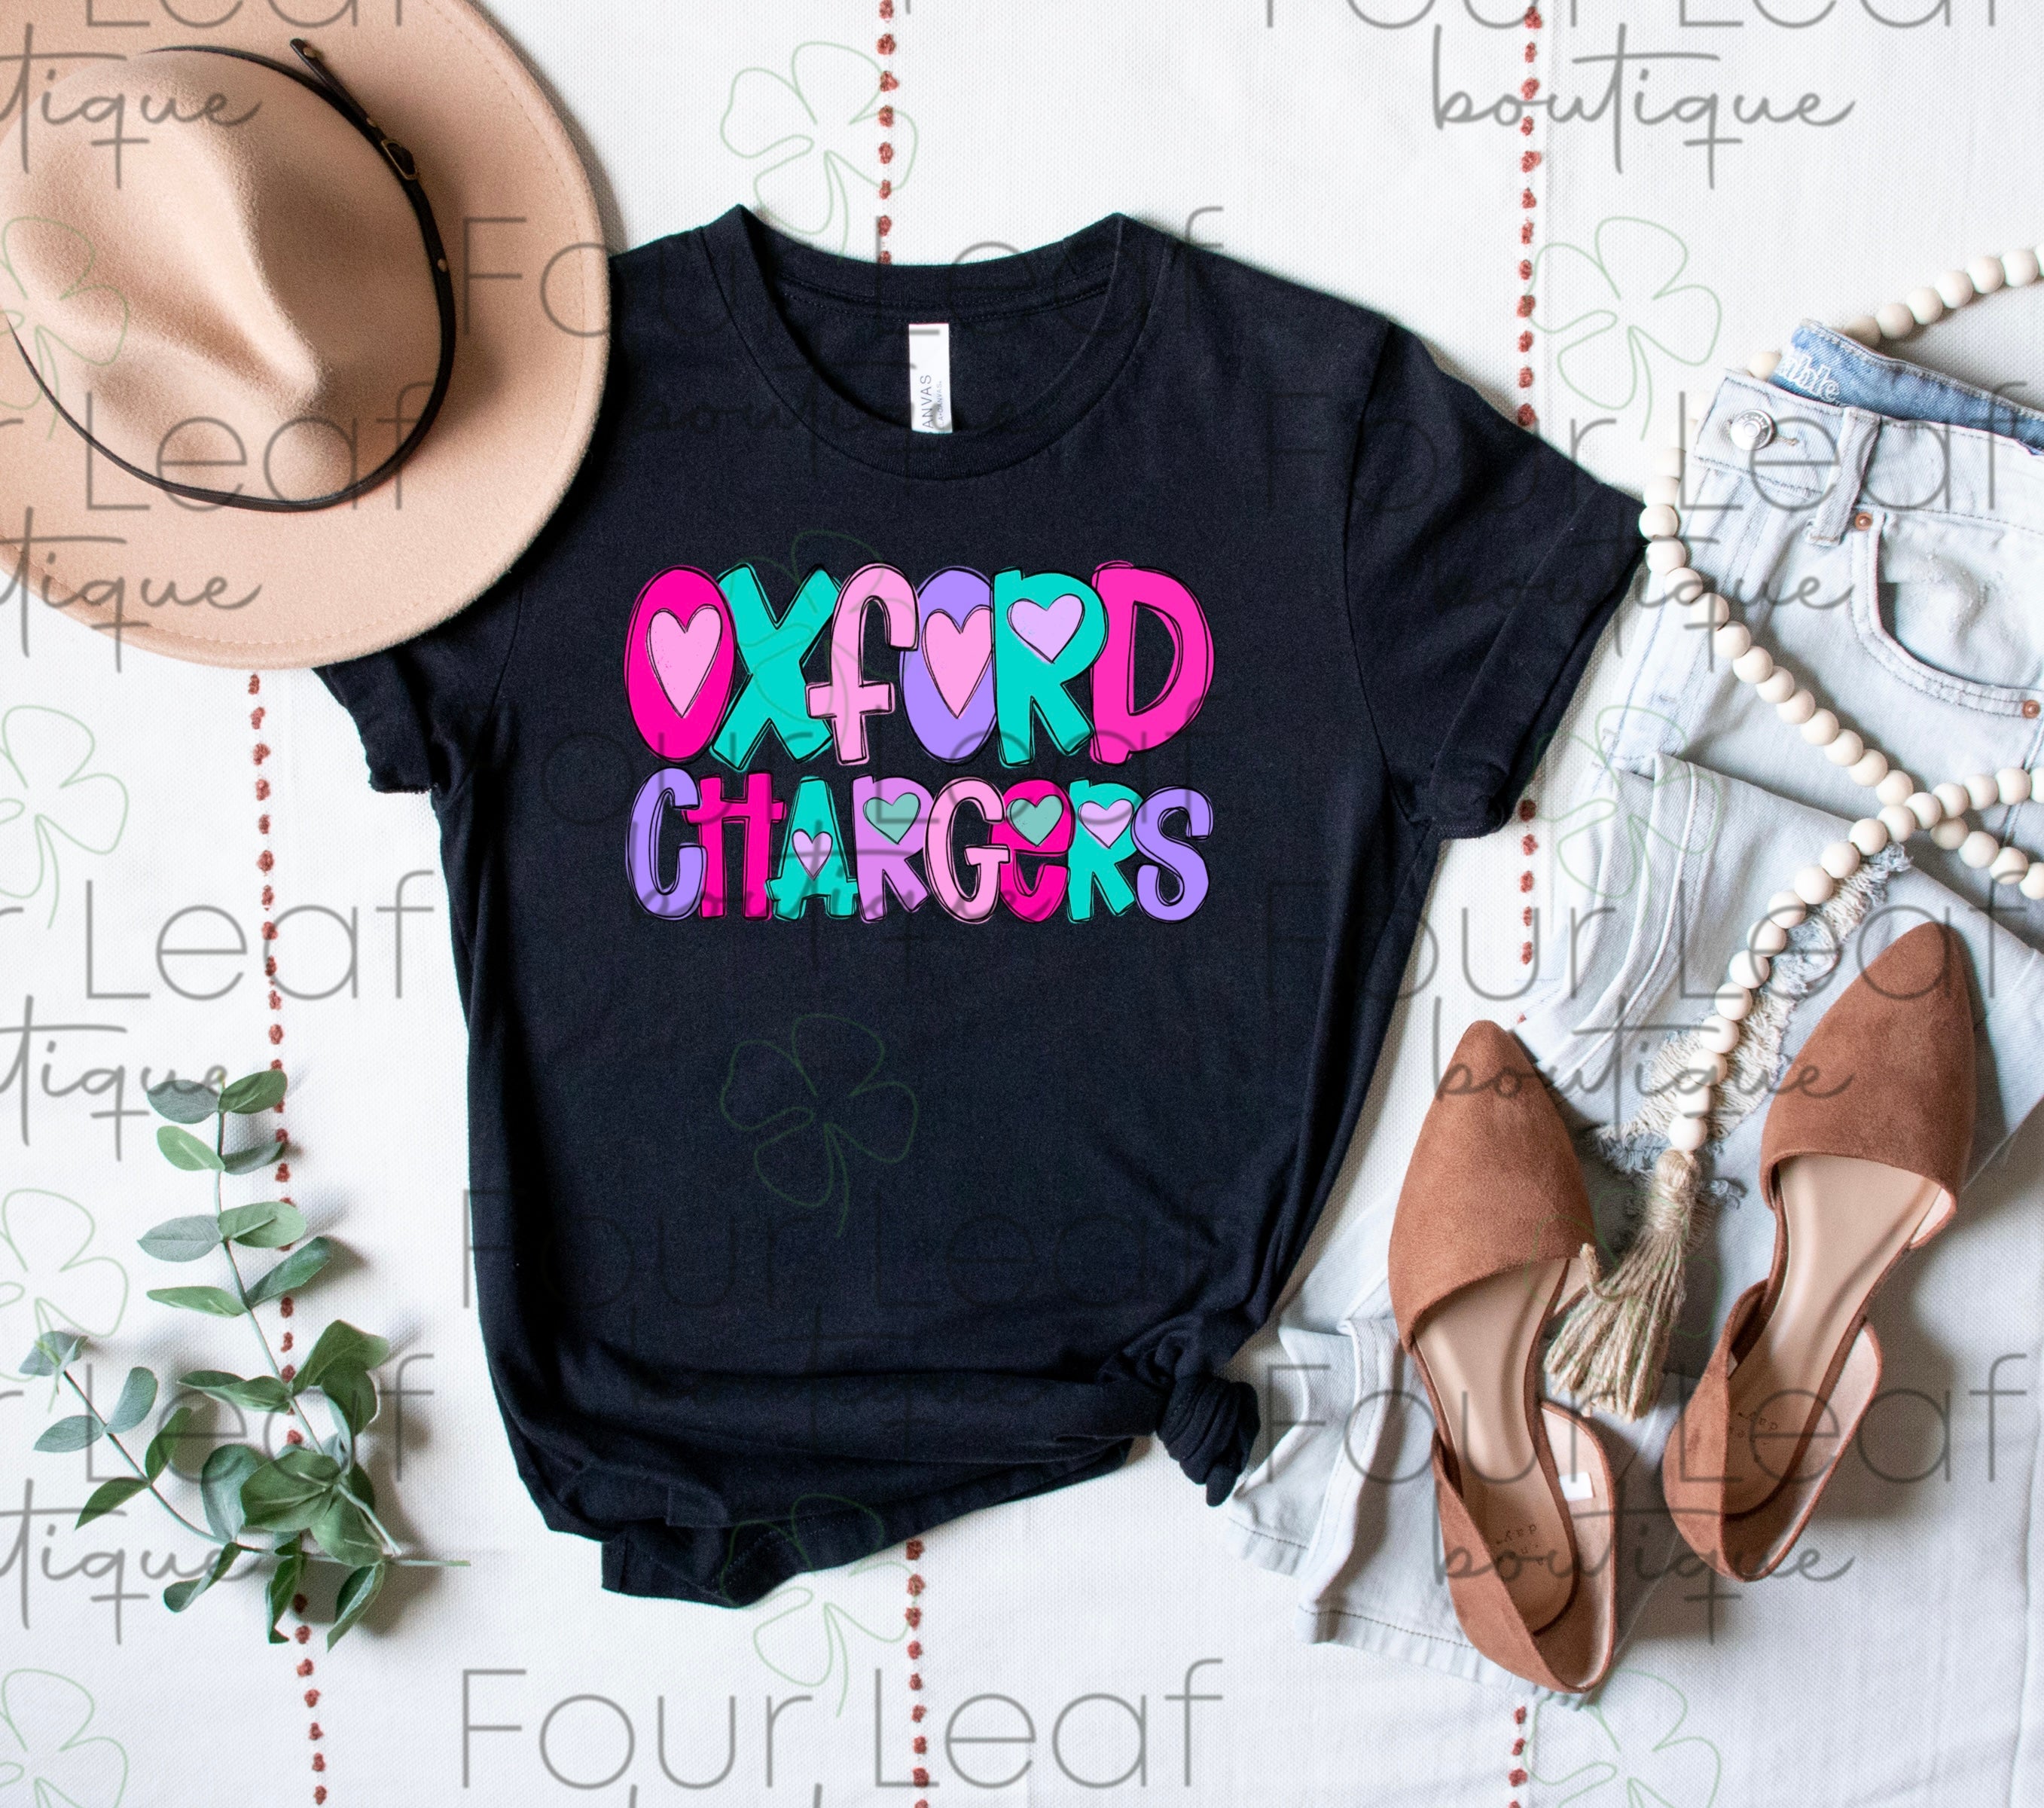 Oxford Chargers- YOUTH sizes